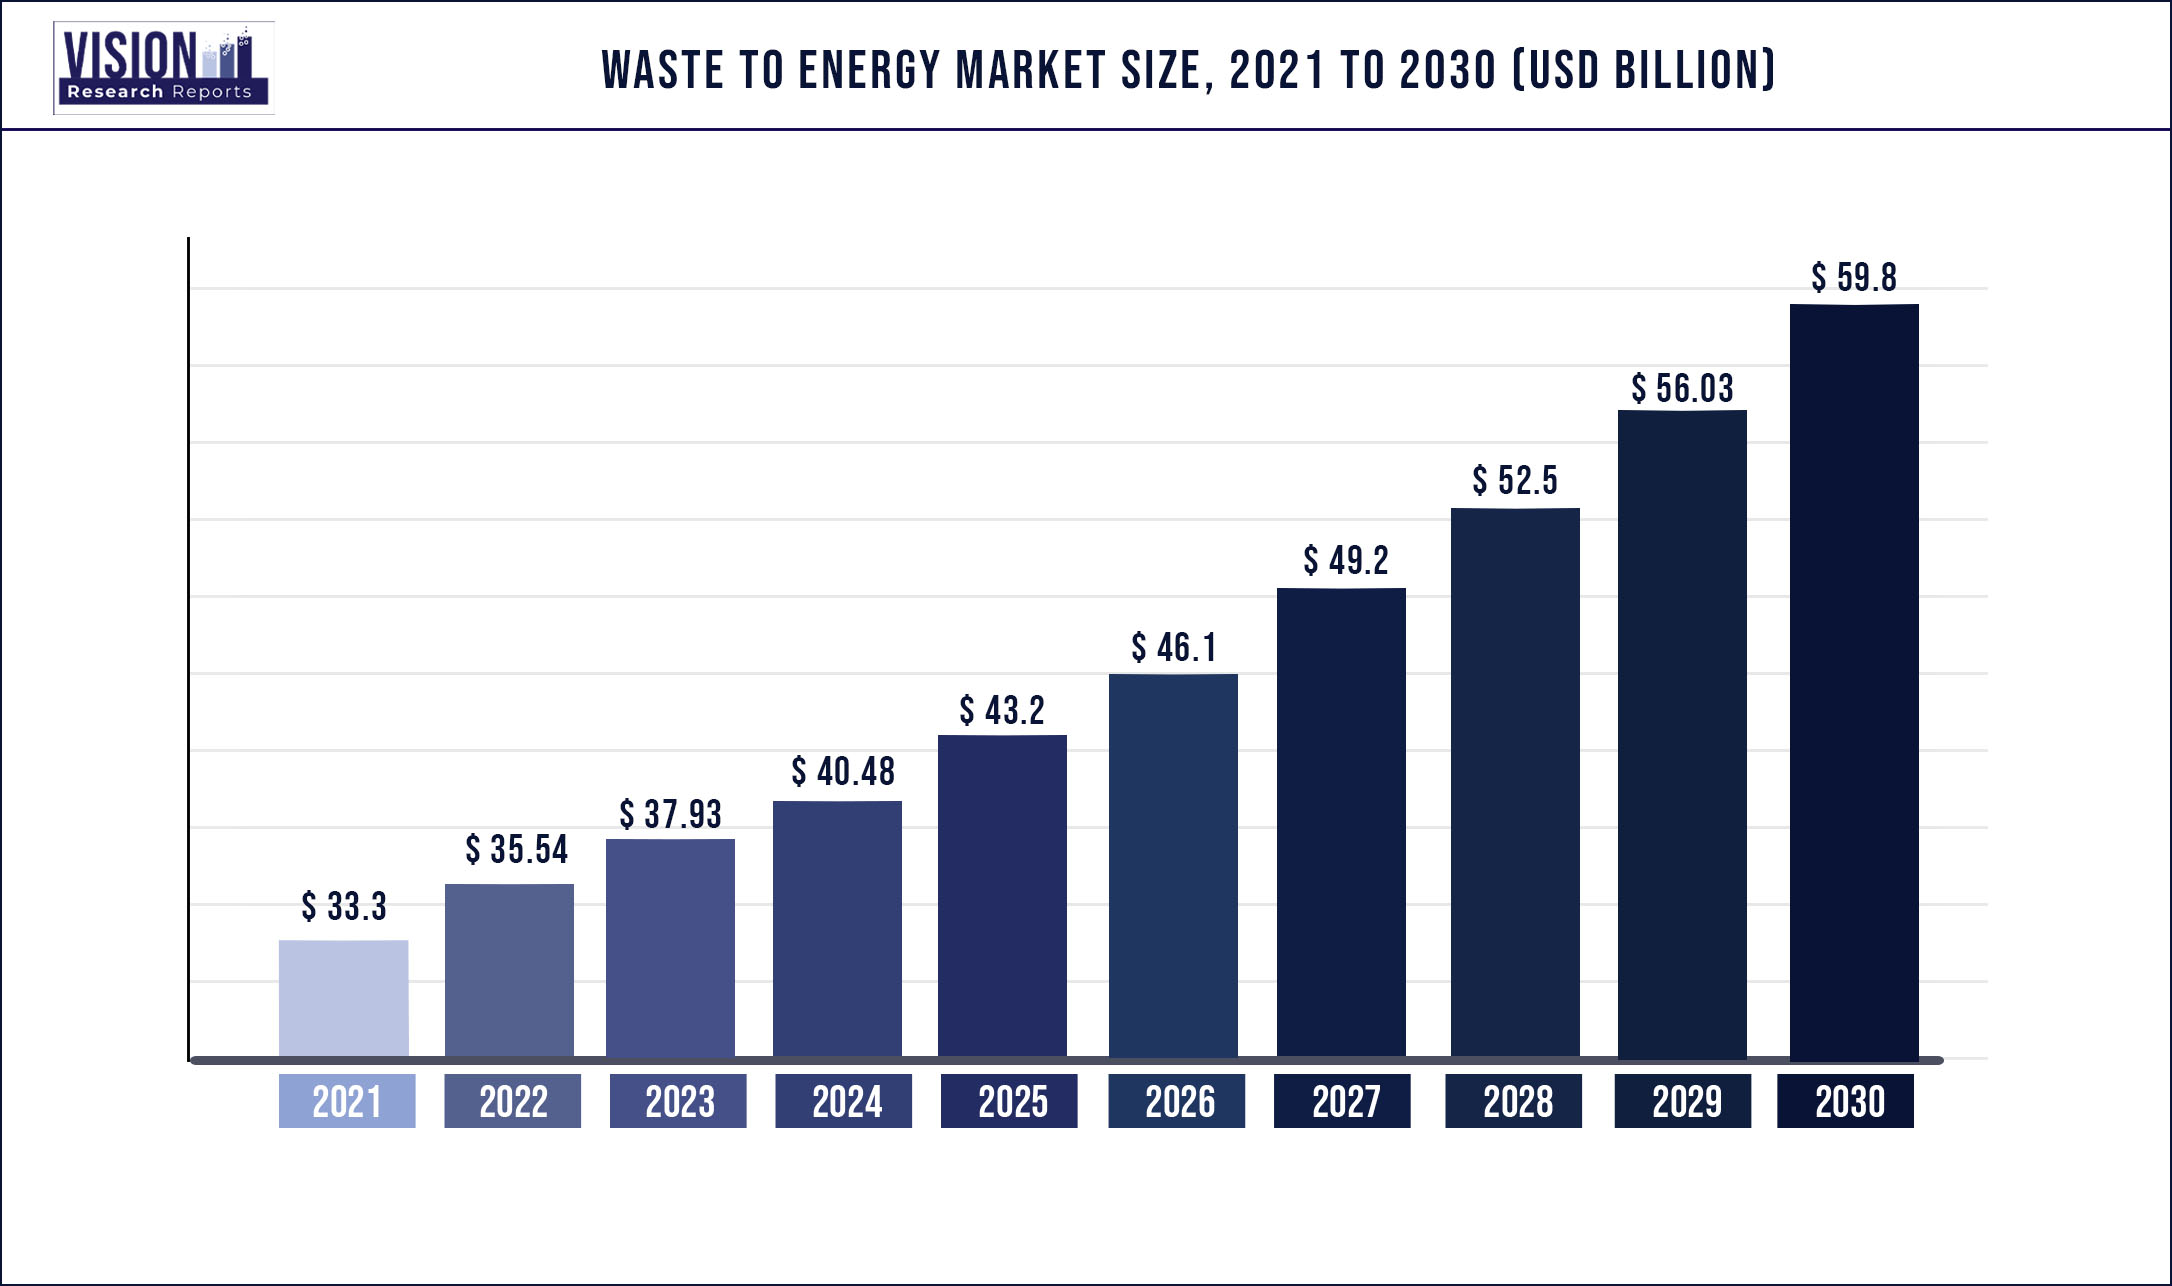 Waste To Energy Market Size 2021 to 2030